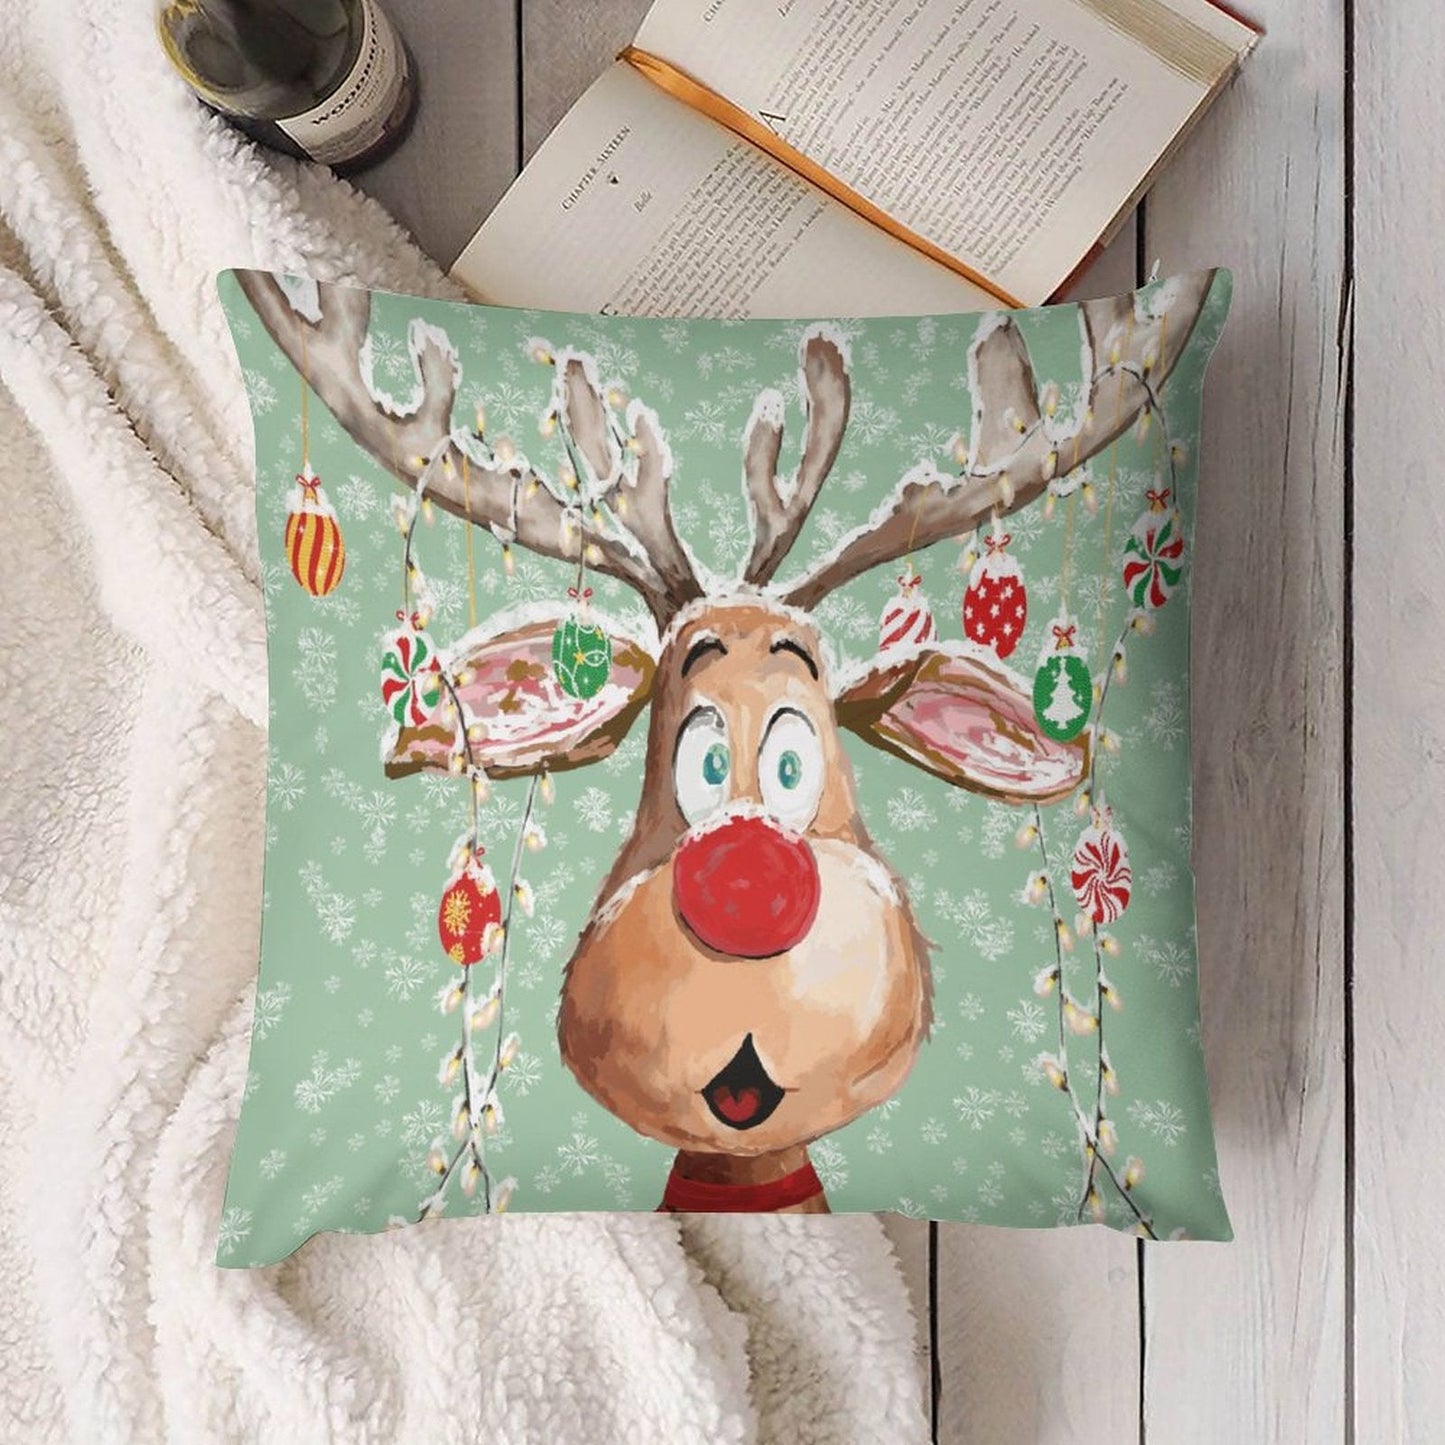 "Pedro" Reindeer Plush Pillow Covers (Pillow not included, Set of 2, Dual side print) - Blue Cava